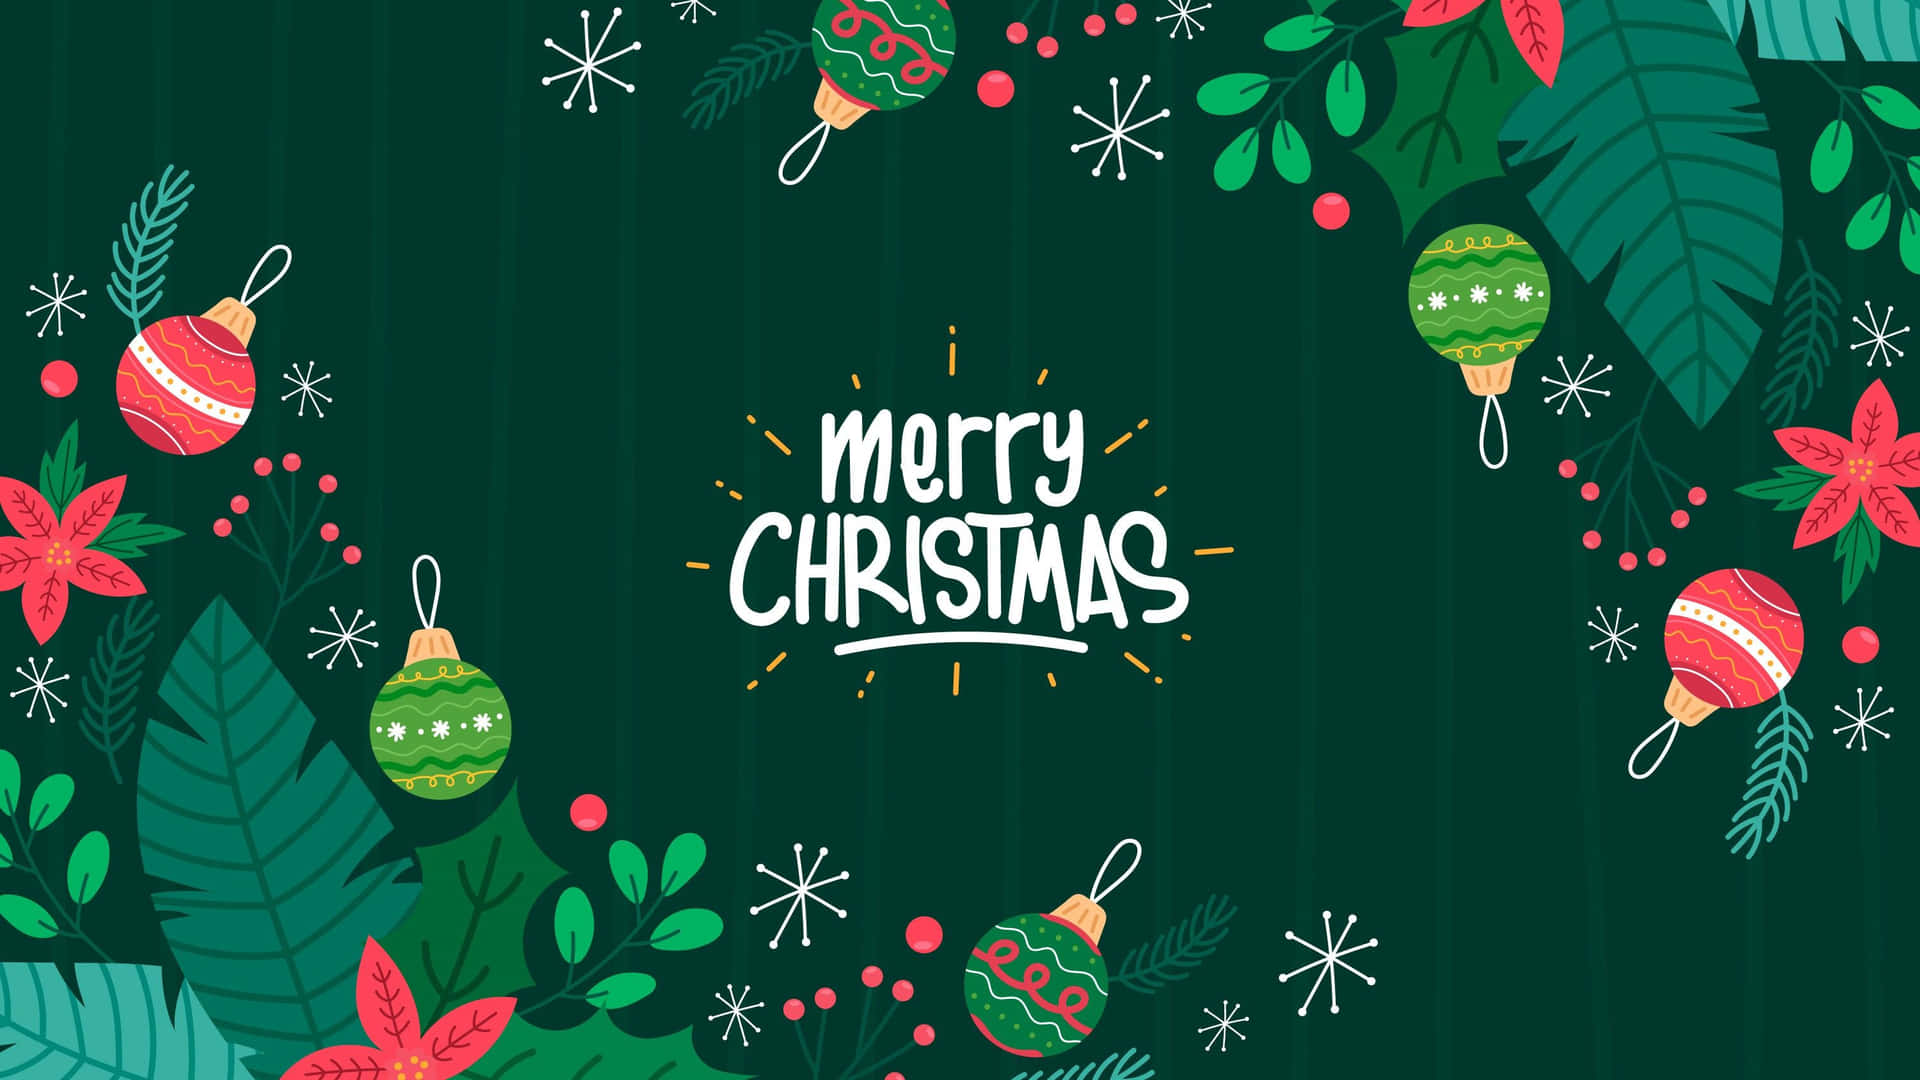 Green Christmas Pictures Wallpaper